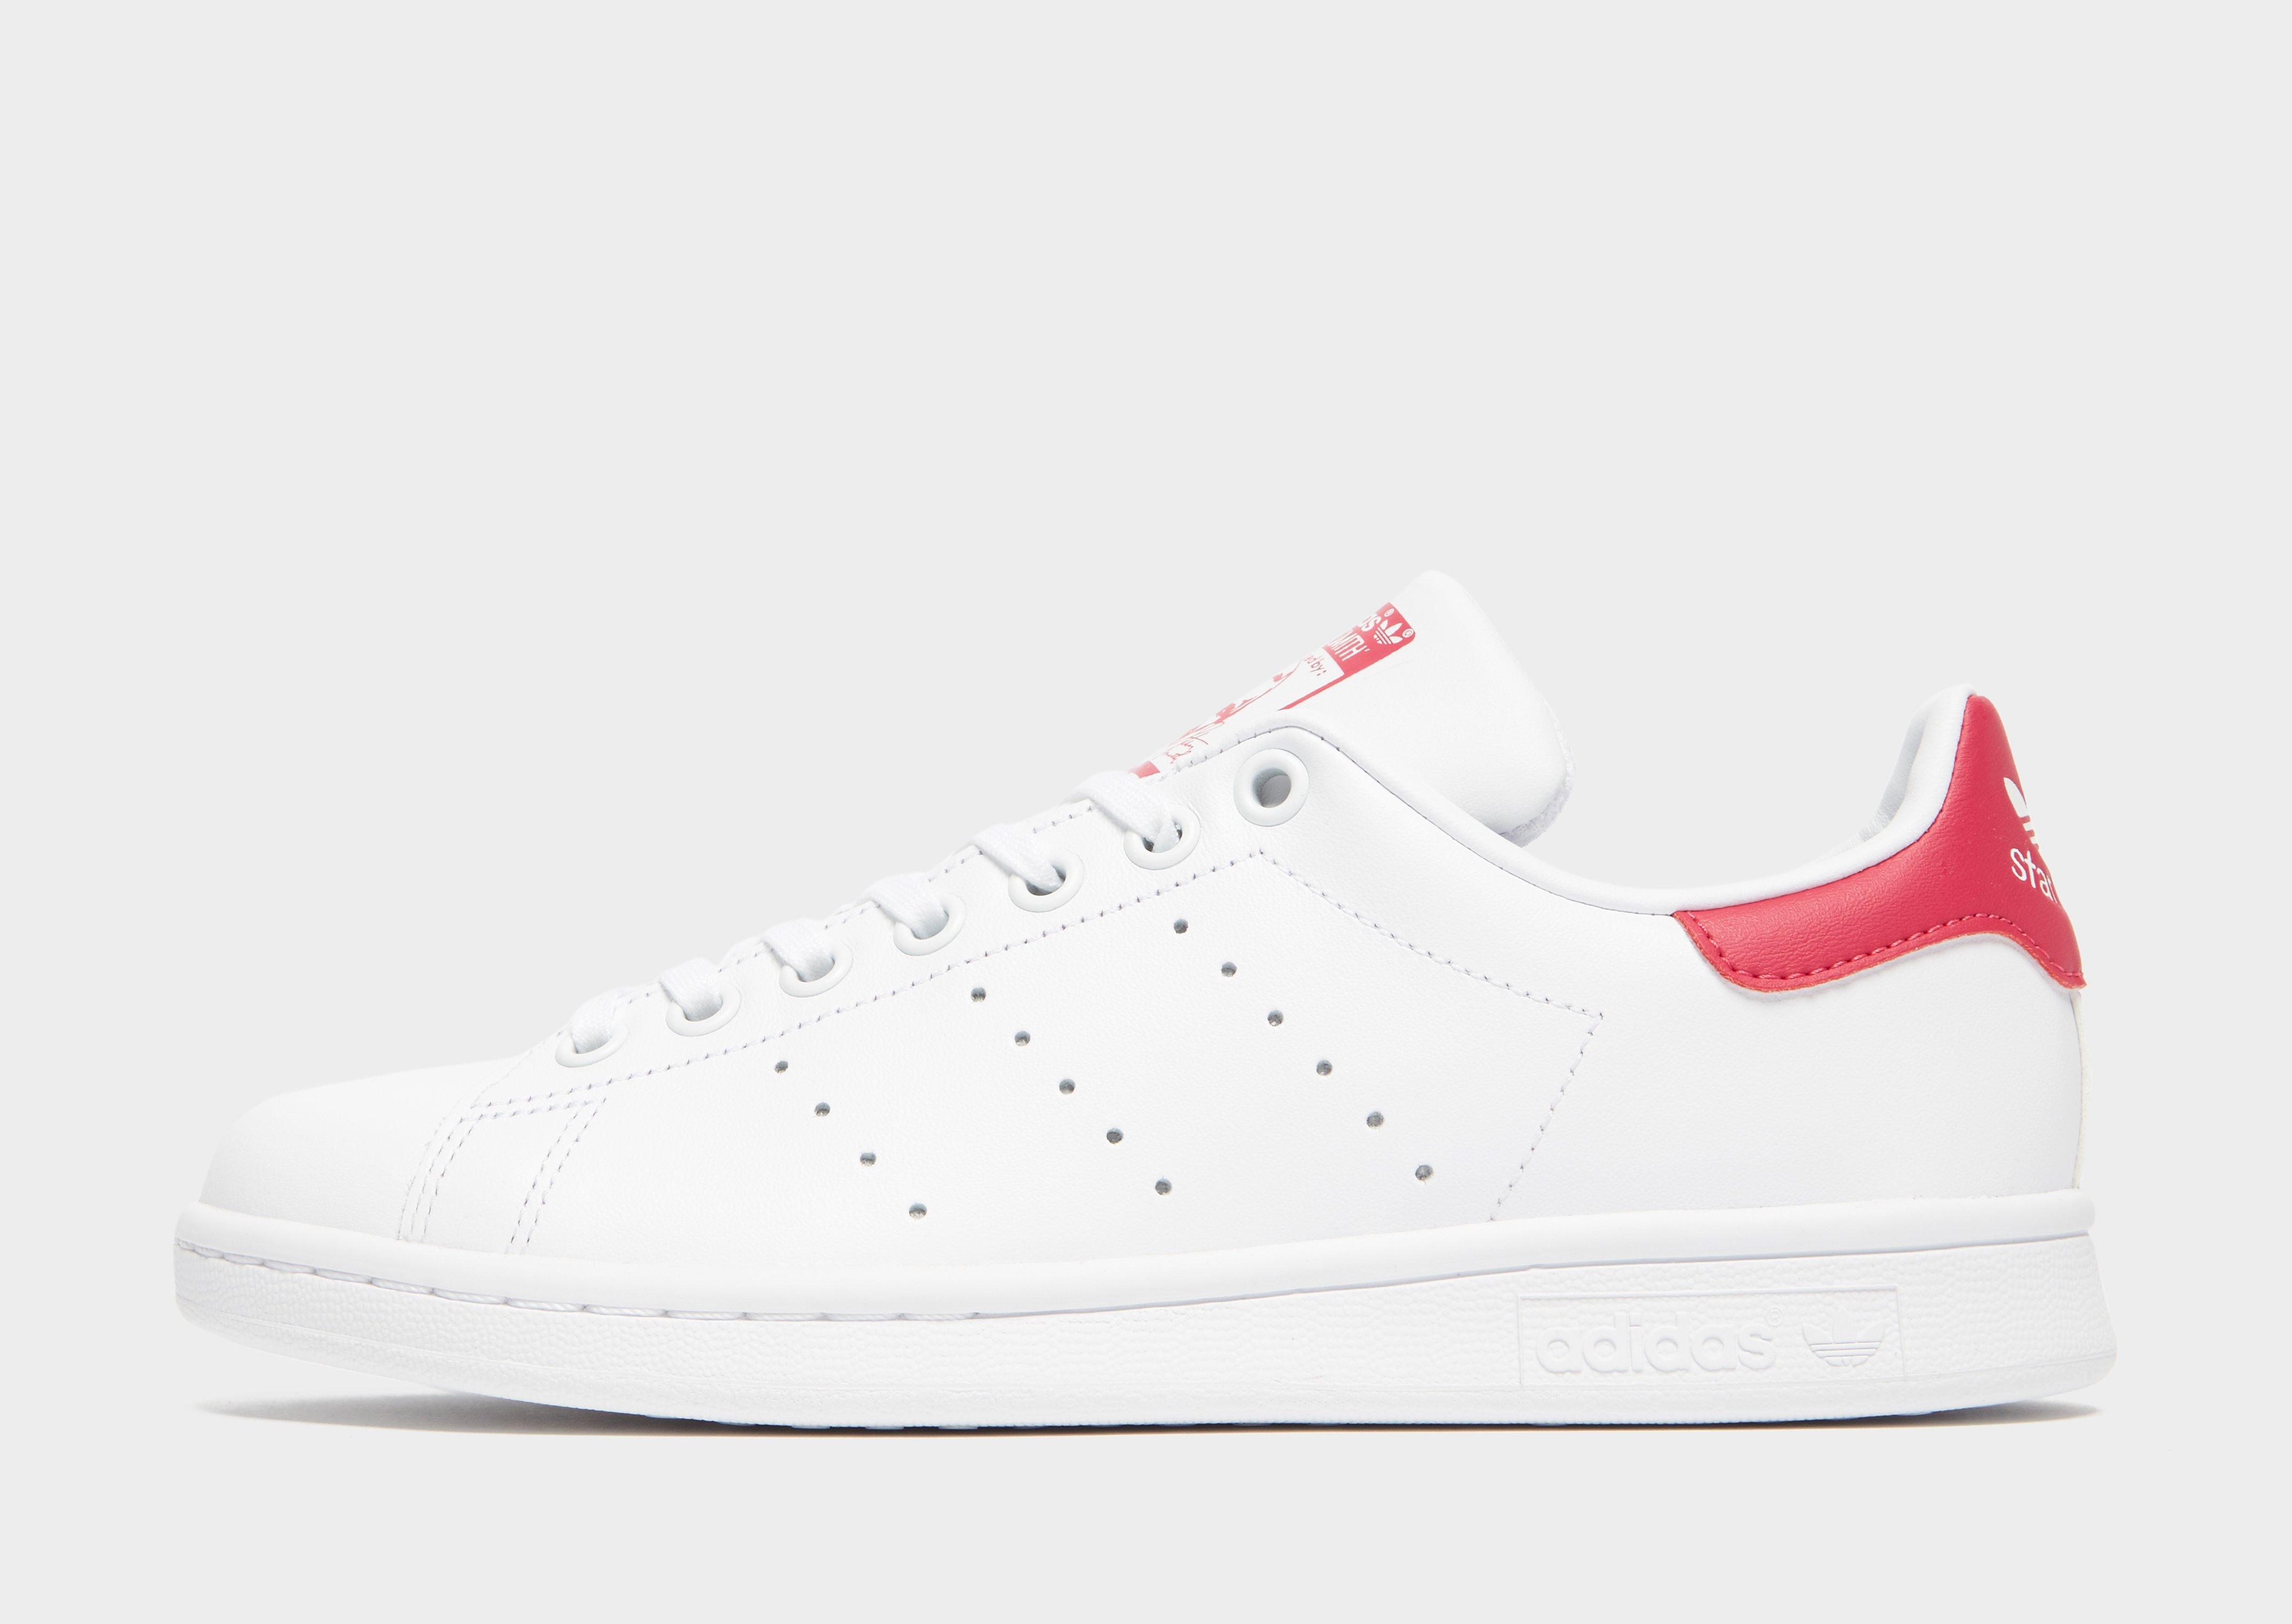 stan smith fille 35